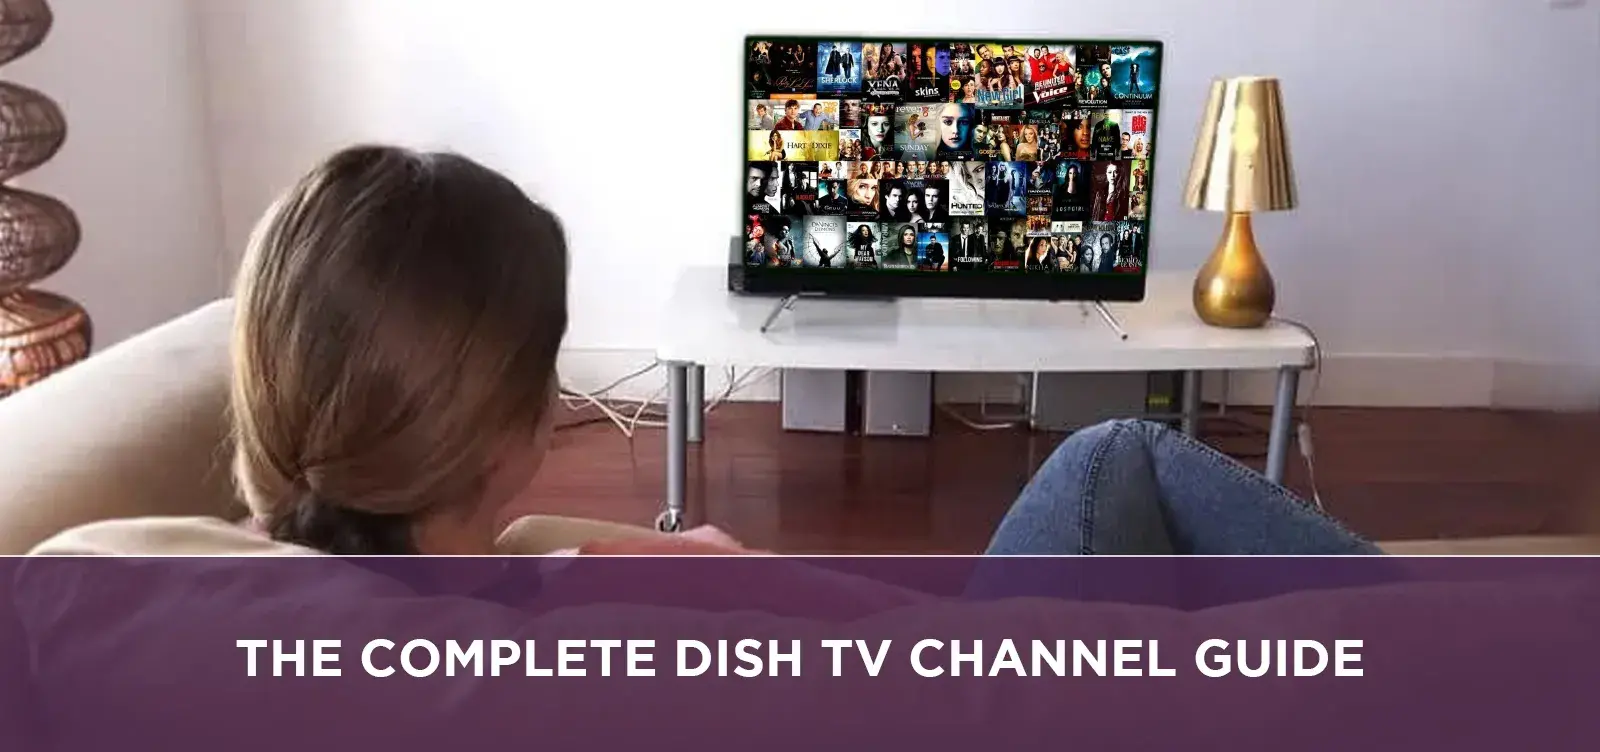 The Complete Dish TV Channel Guide | SattvforMe